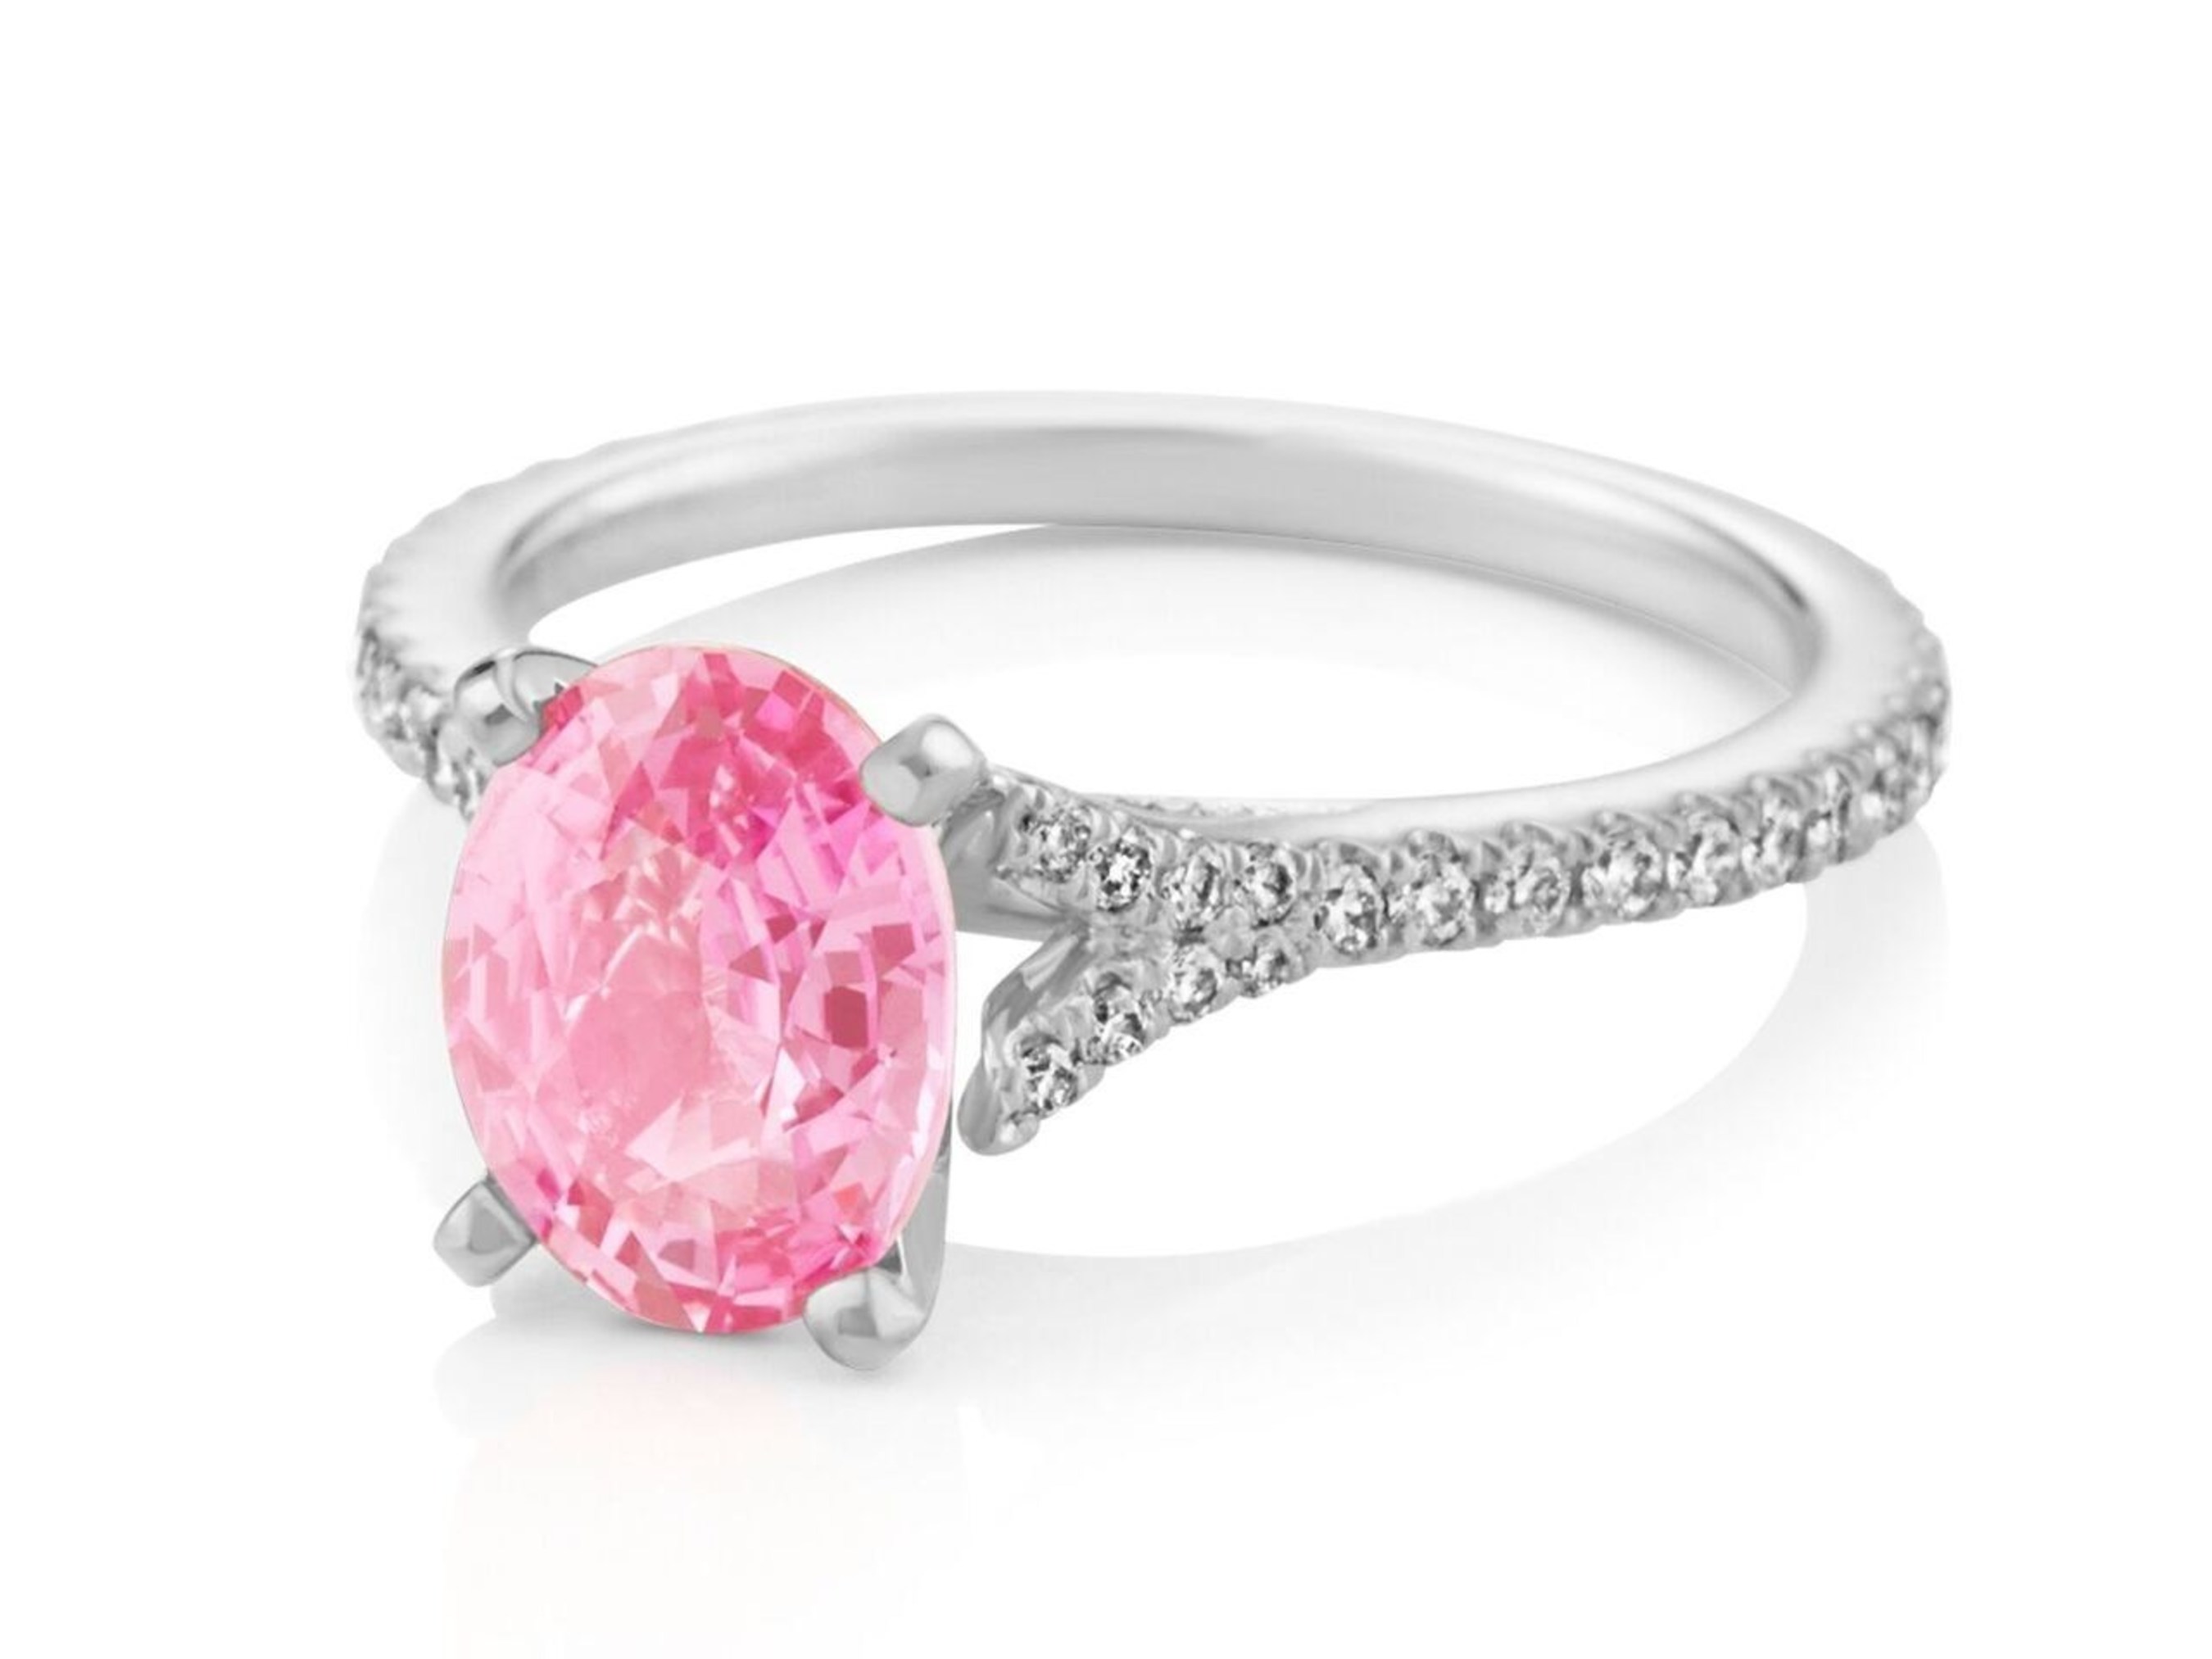 Shane Co. Pink Sapphire, Diamond and Platinum Engagement Ring - Seven Engagement Rings for Christmas 2016